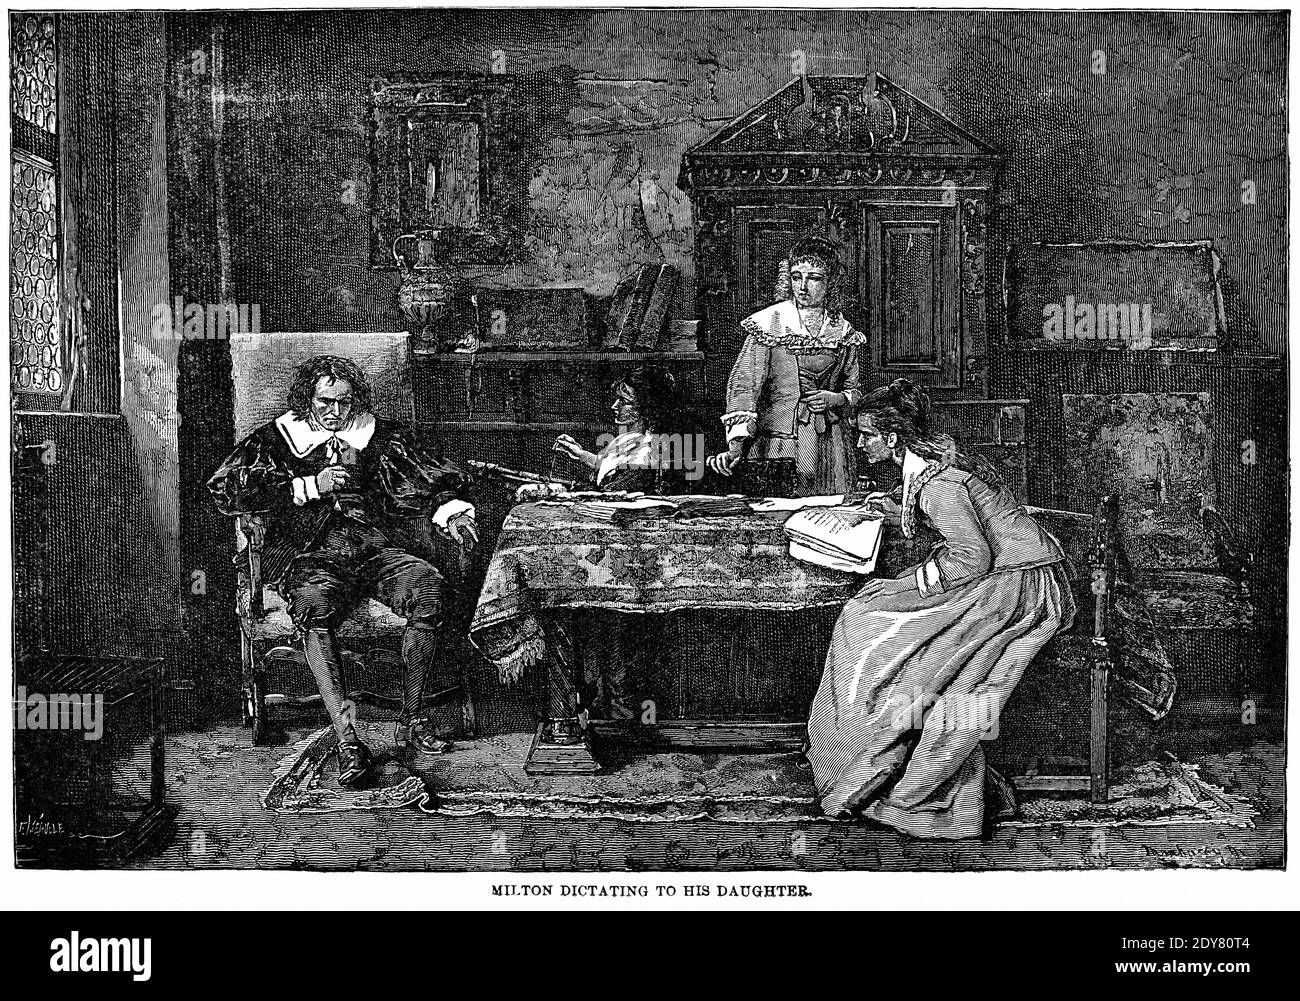 Milton dictating to his Daughter, Illustration, Ridpath's History of the World, Volume III, by John Clark Ridpath, LL. D., Merrill & Baker Publishers, New York, 1897 Stock Photo